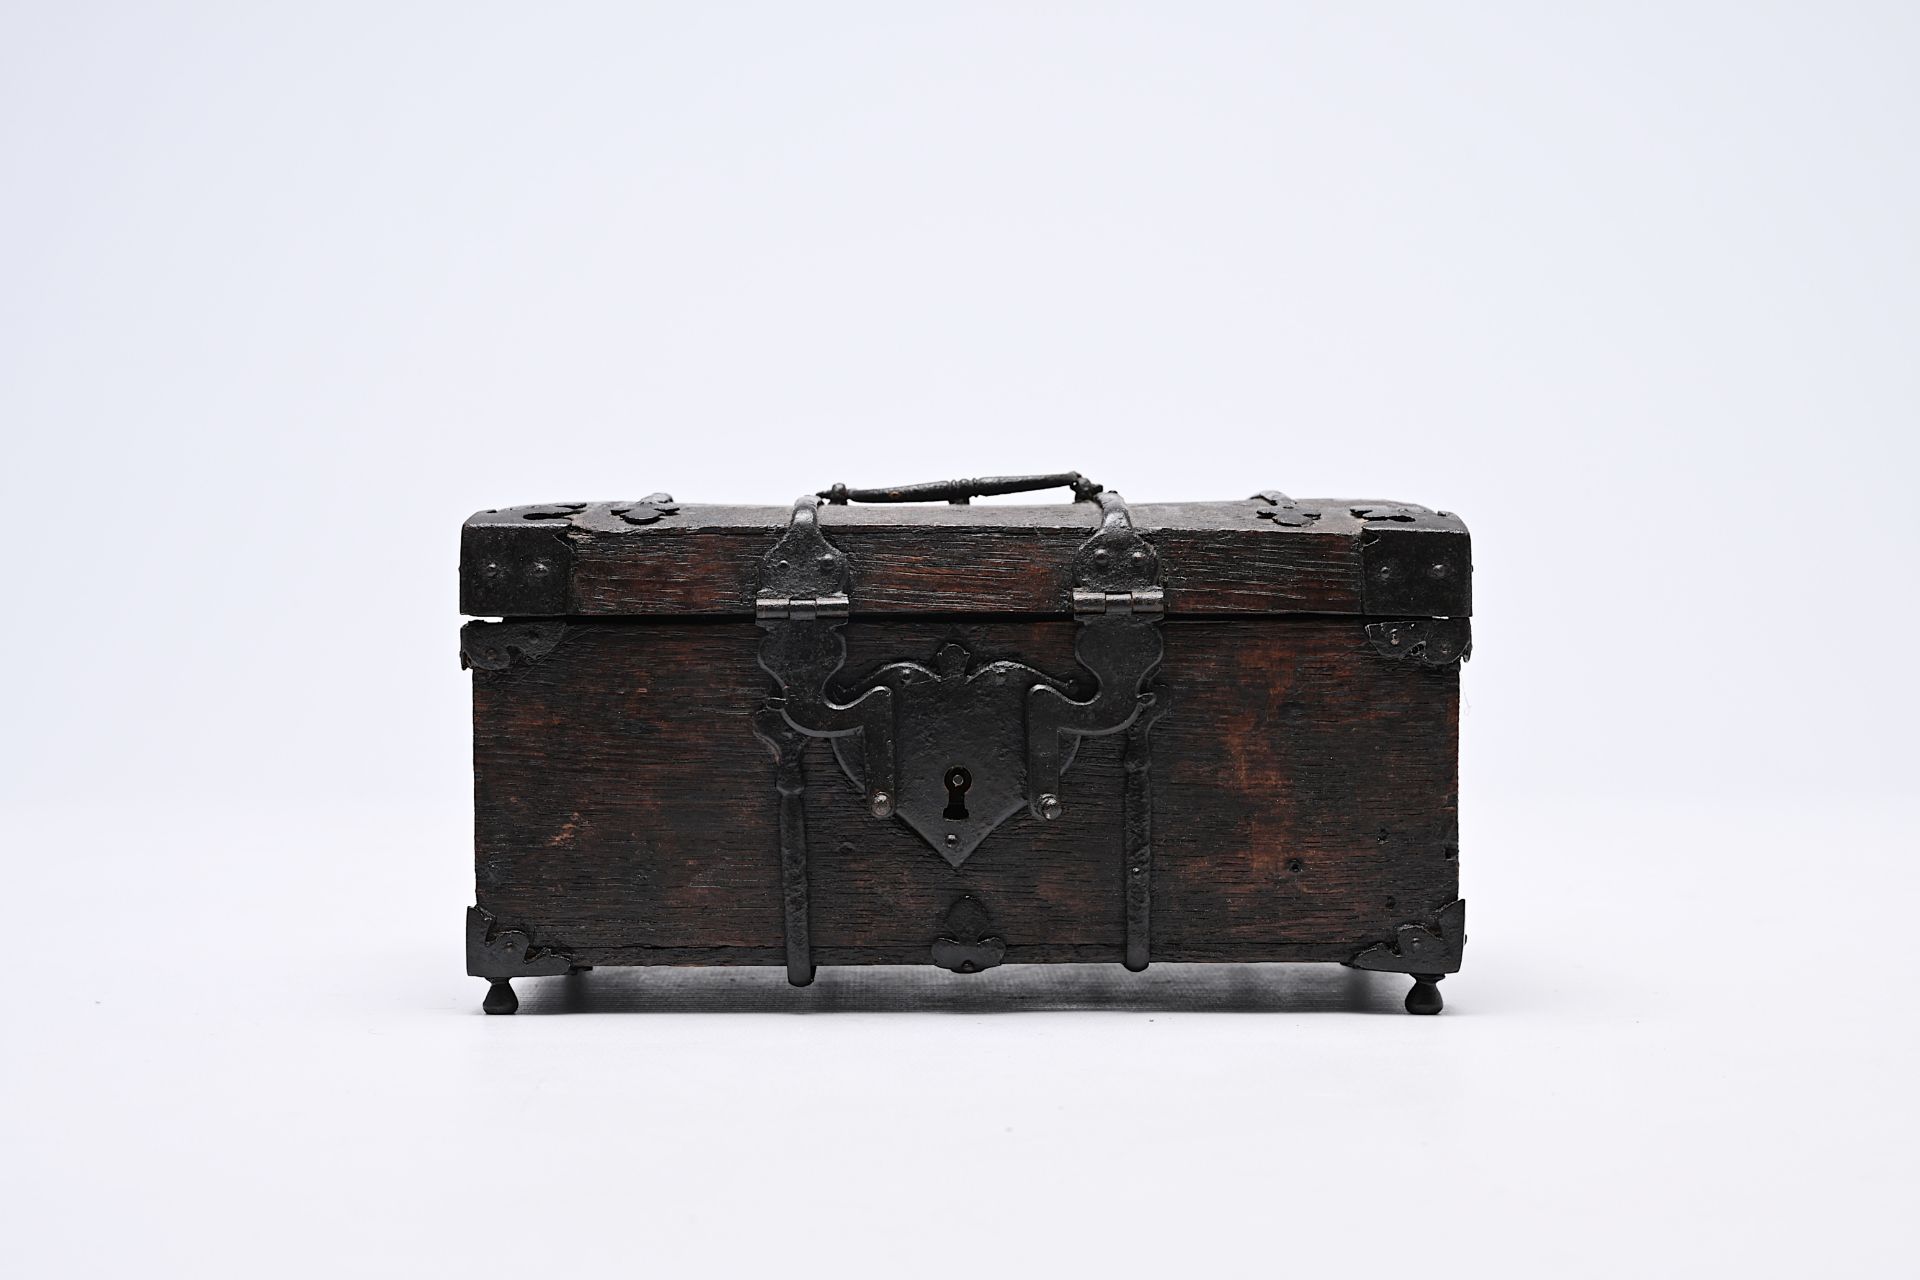 A wooden chest with iron mounts, Western Europe, 16th C. - Image 3 of 11